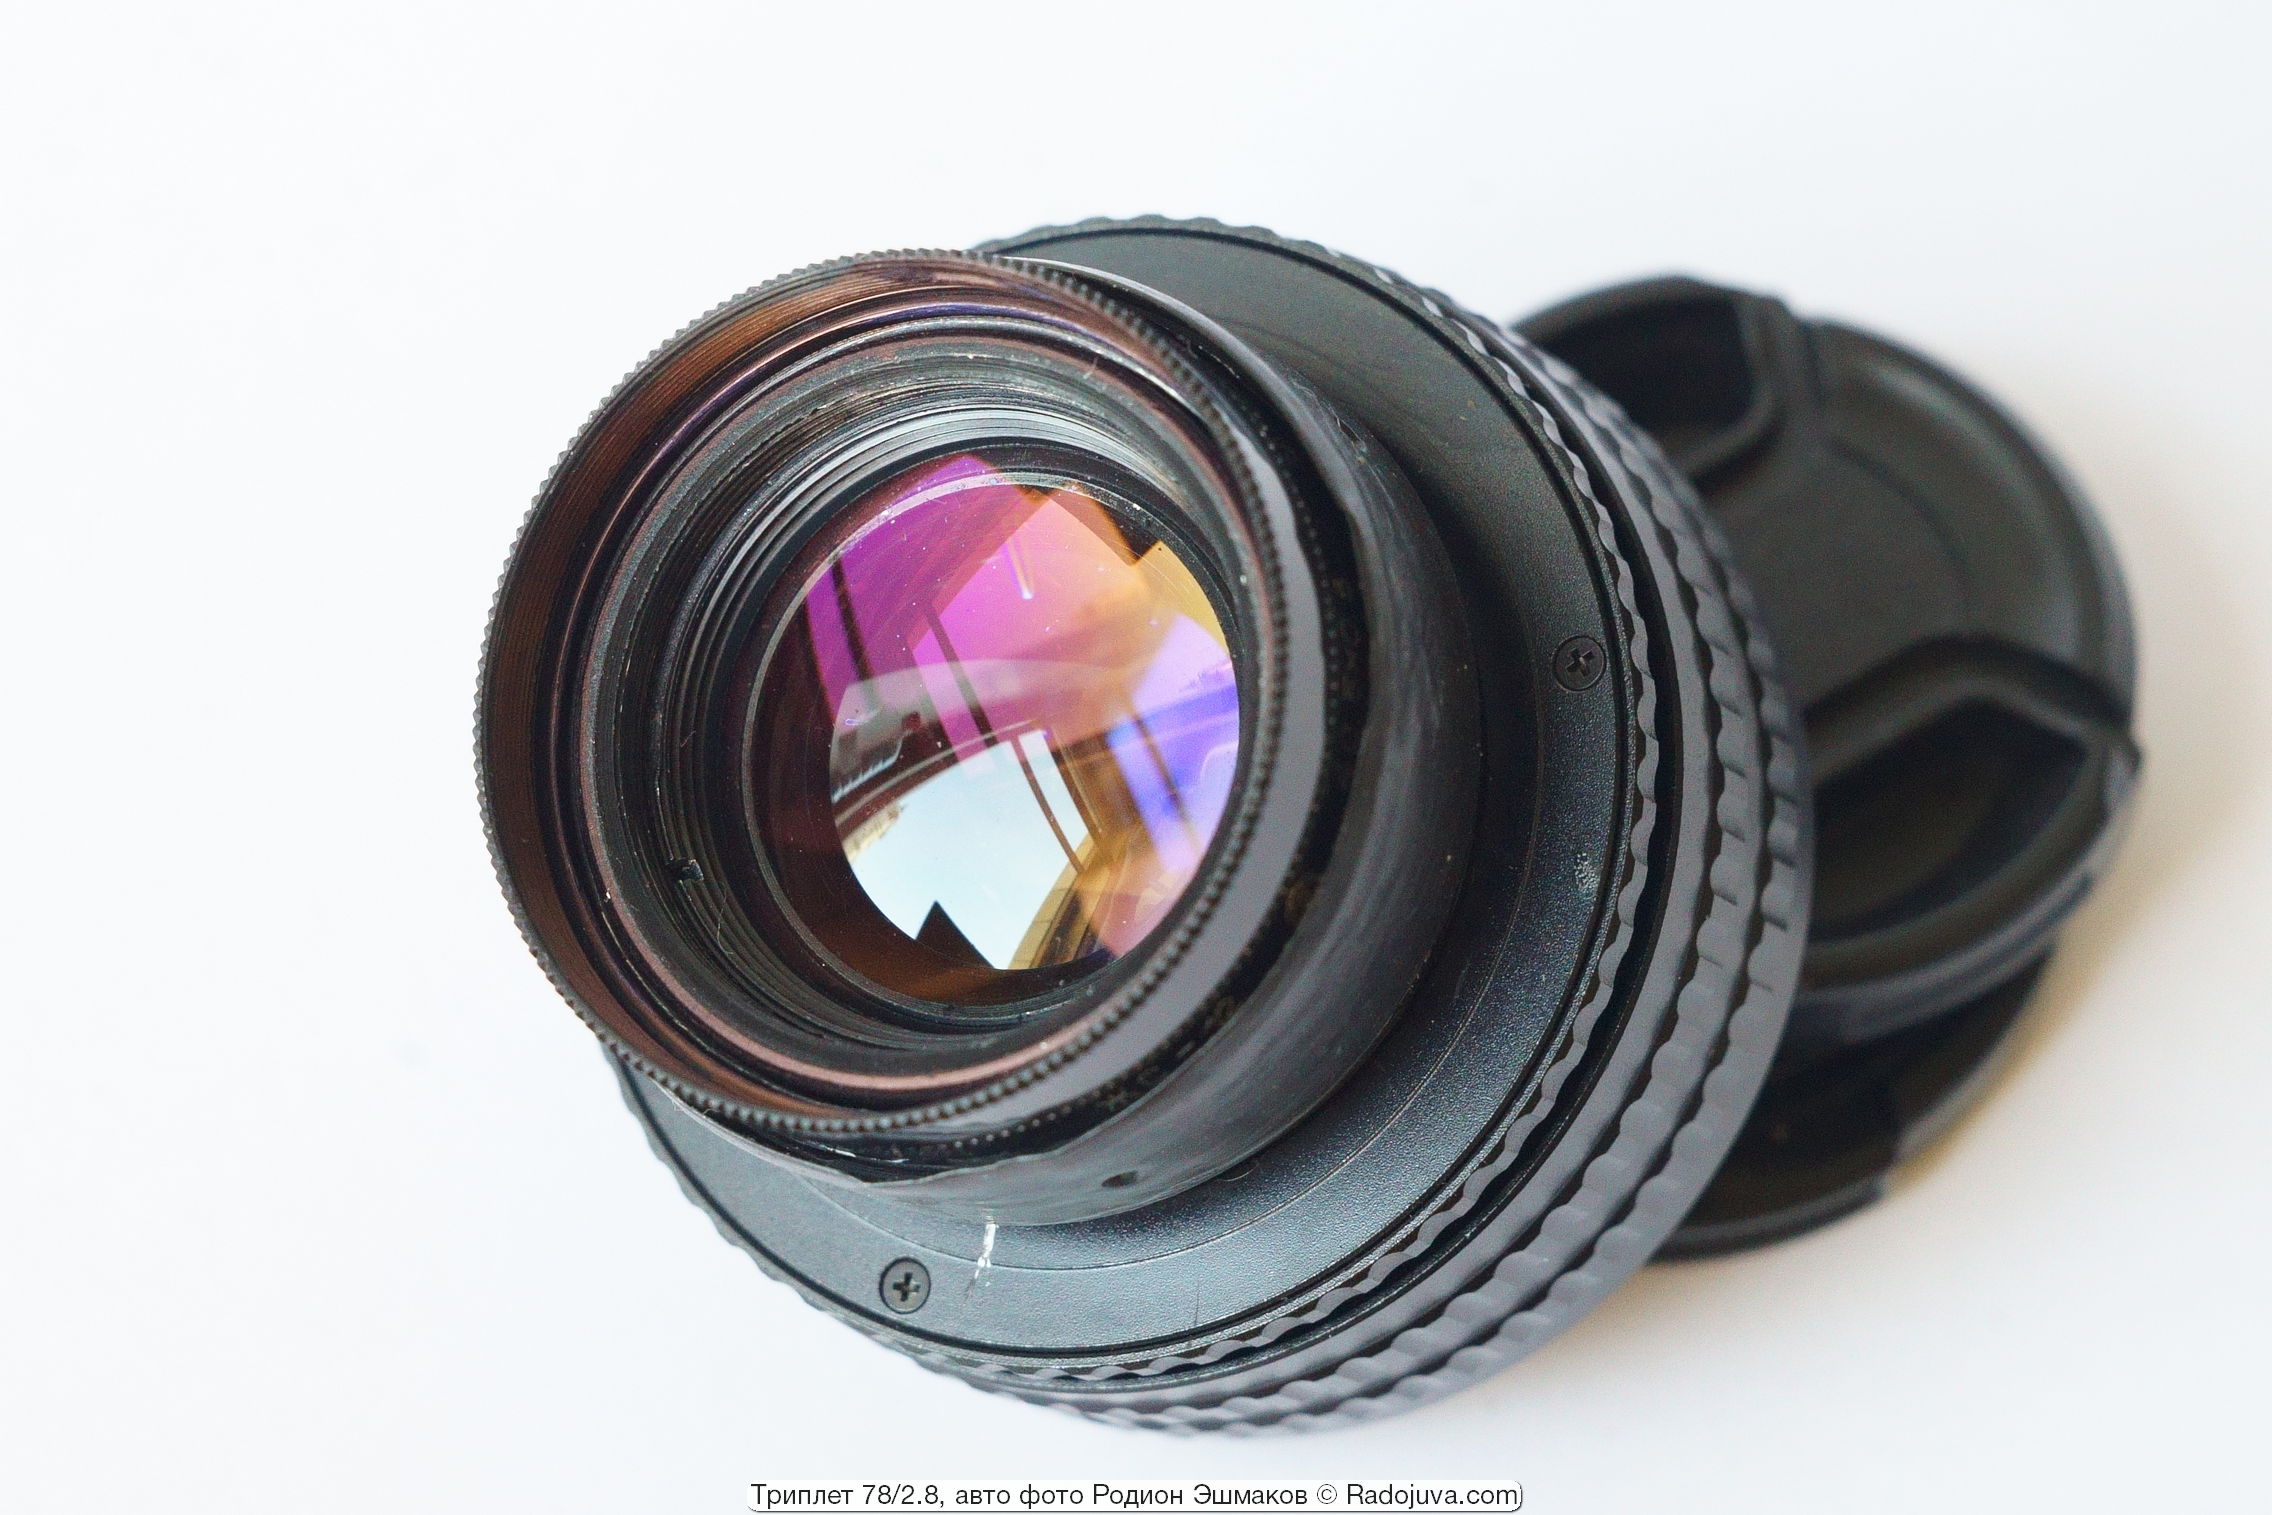 After blackening the ends of the lenses and the inner surfaces of the lens unit, nothing shiny is visible in the lens.